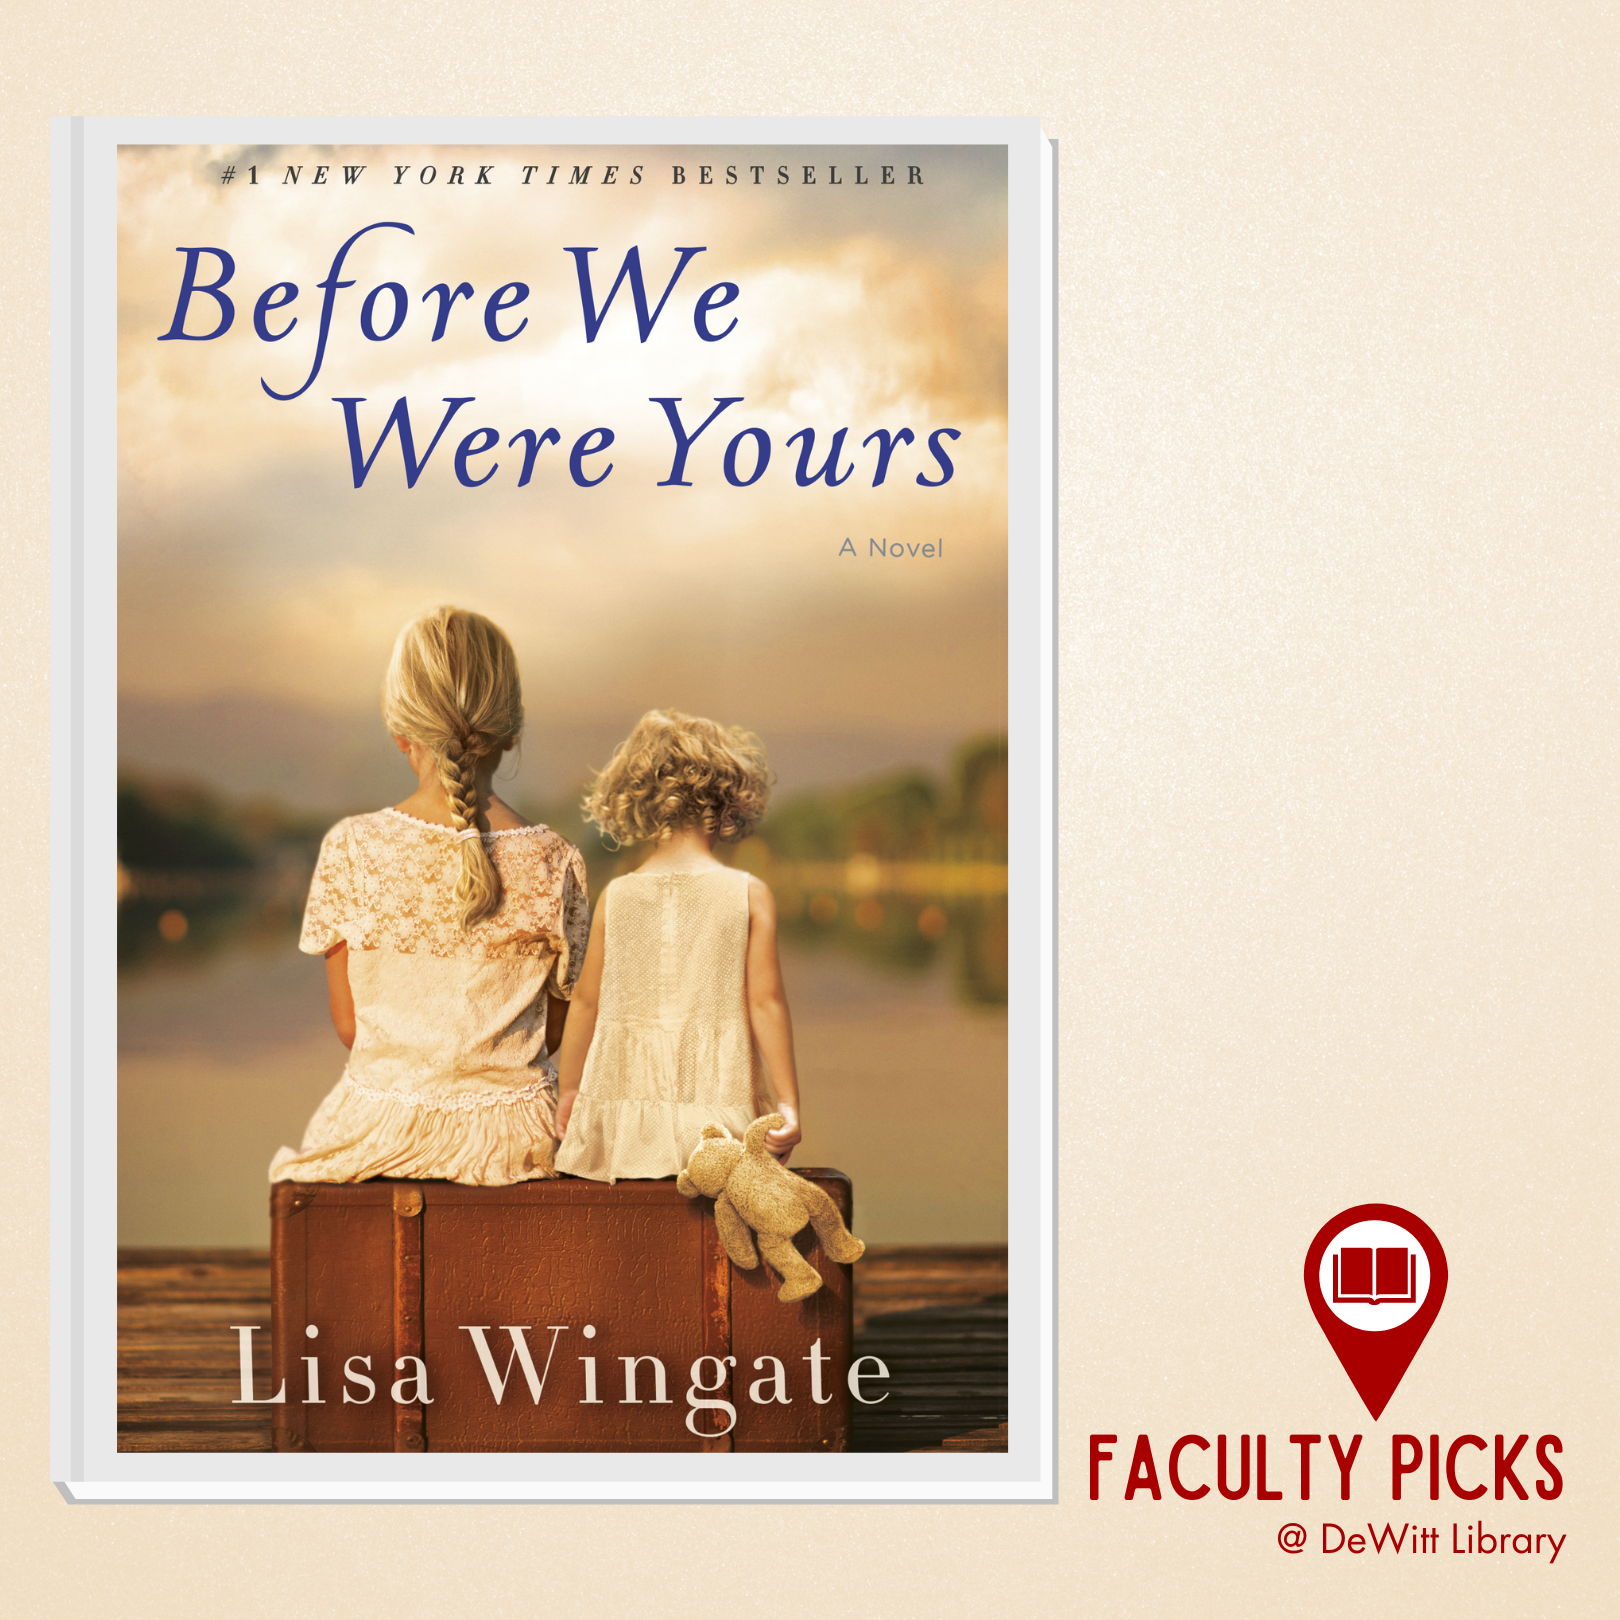 Faculty Pick book cover - Before we were yours: a novel by Lisa Wingate